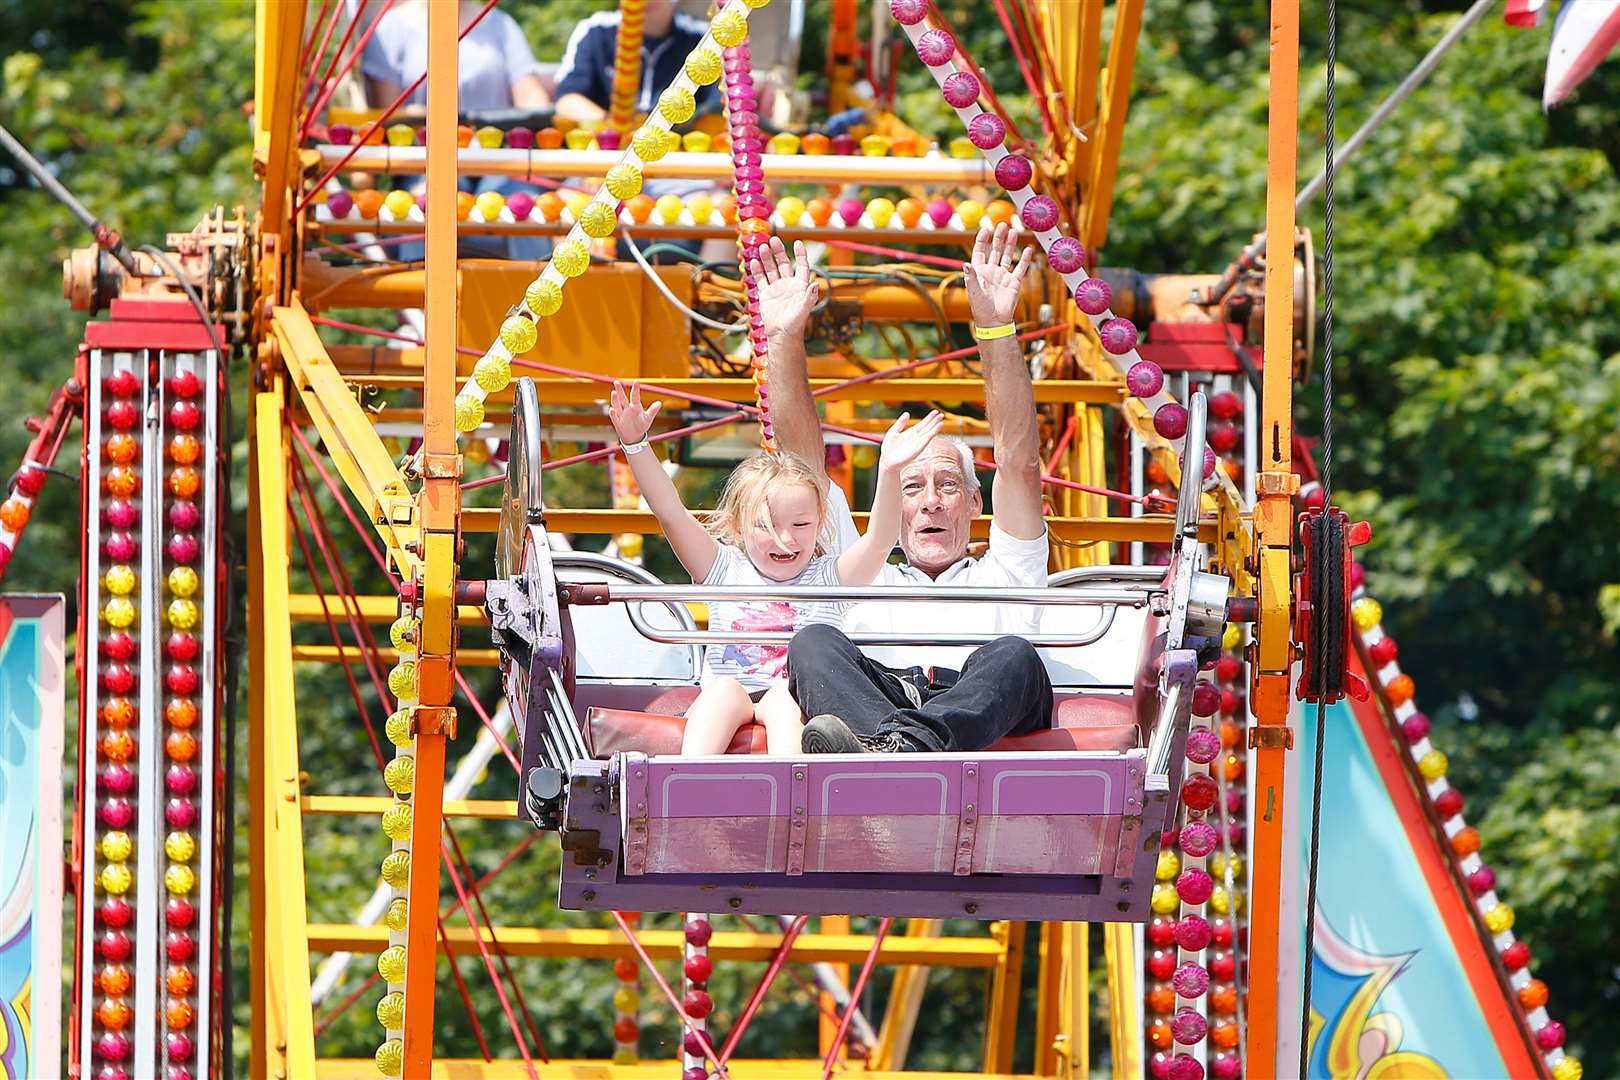 People enjoyed the ferris wheel at last years show